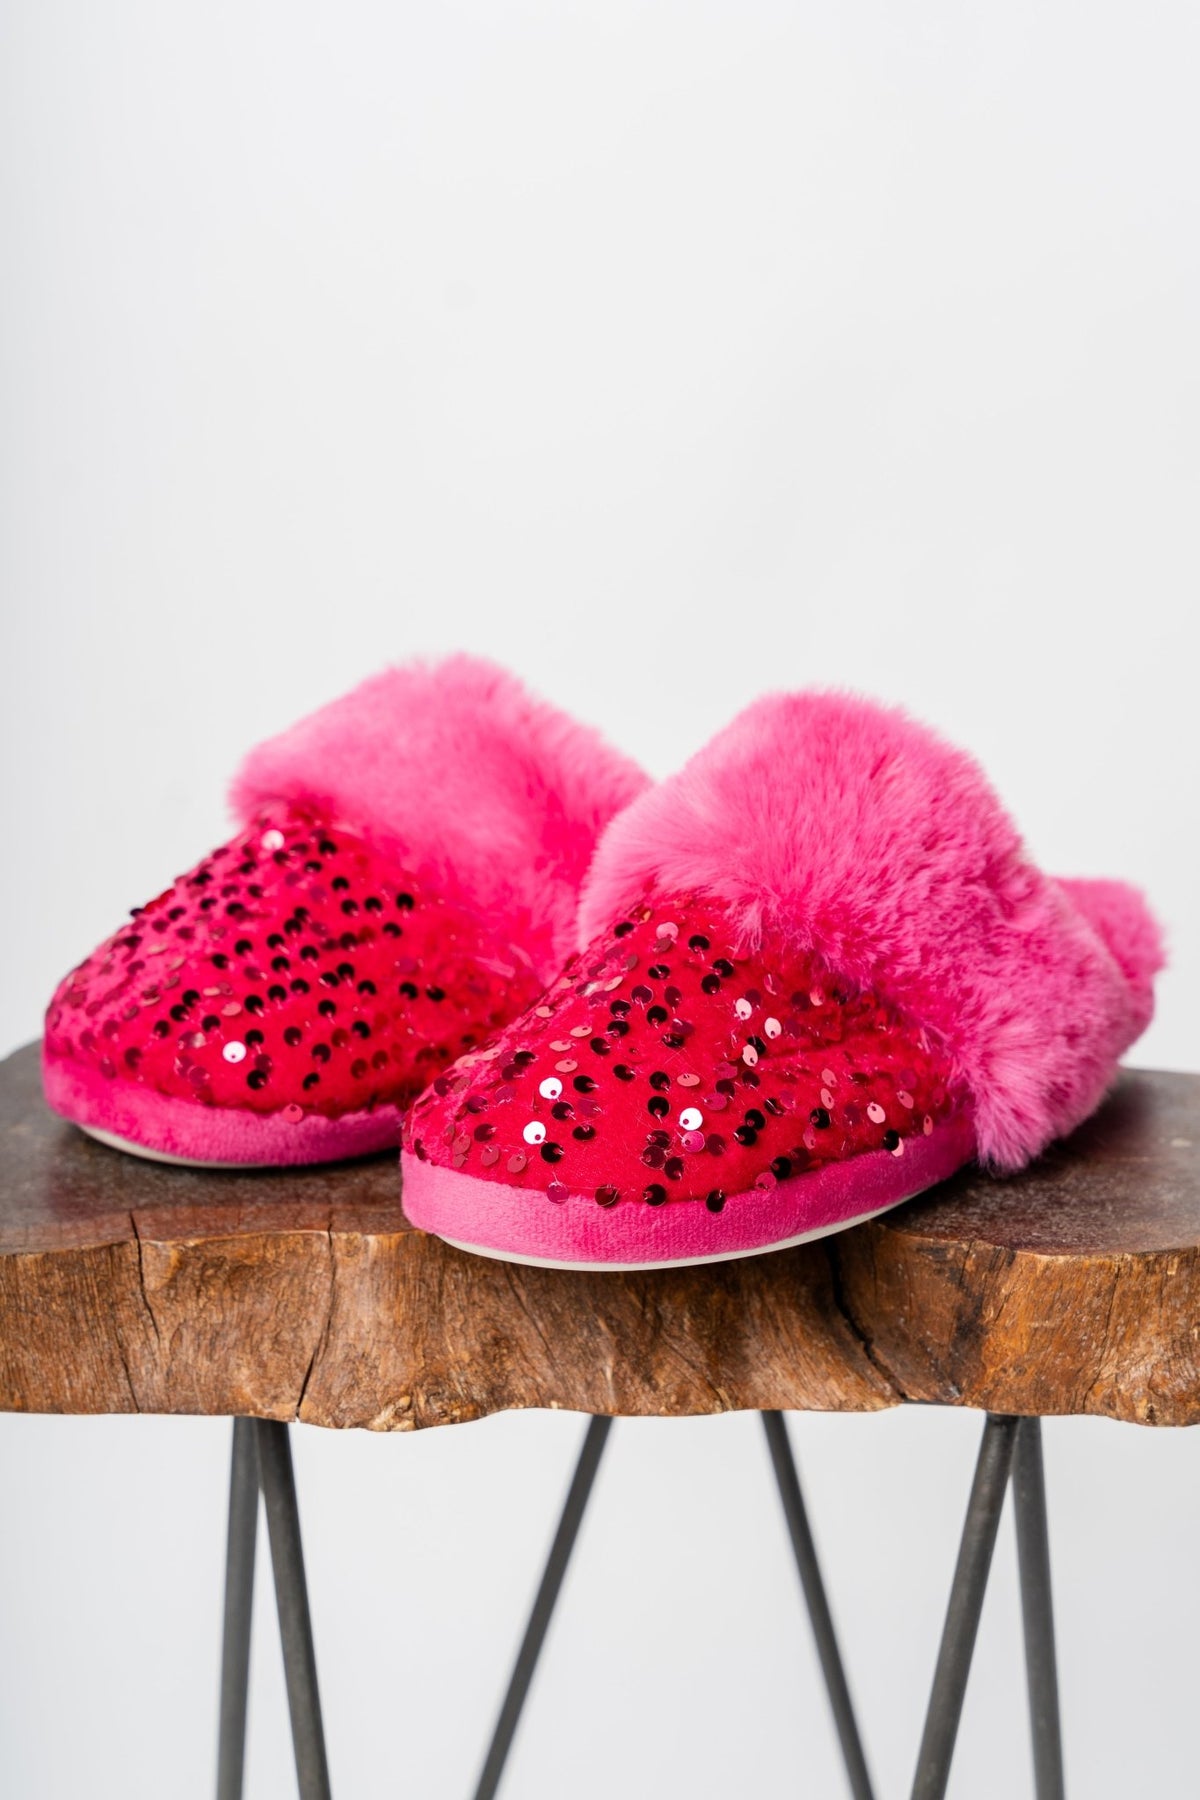 Fiesta sequin slippers magenta - Trendy Holiday Apparel at Lush Fashion Lounge Boutique in Oklahoma City